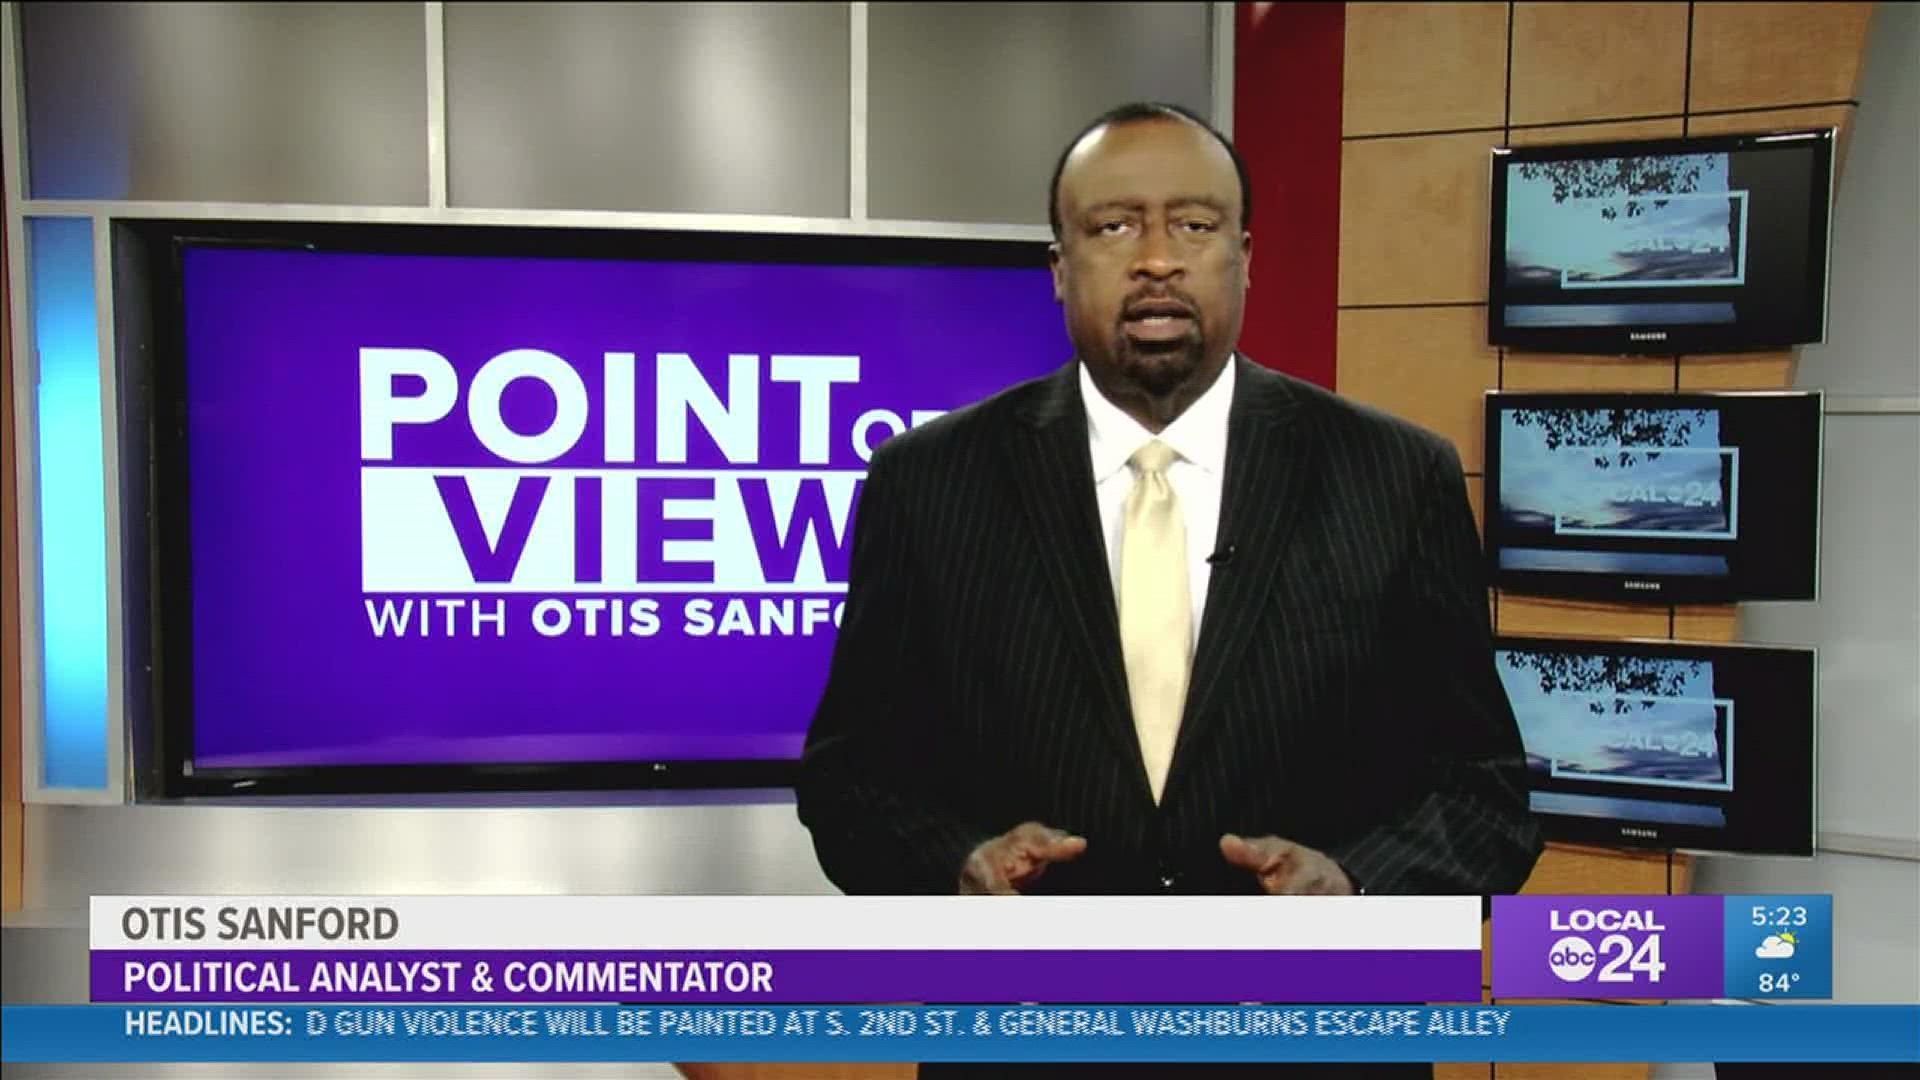 Political analyst and commentator Otis Sanford shared his point of view on the issue of consolidating Memphis and Shelby County governments.